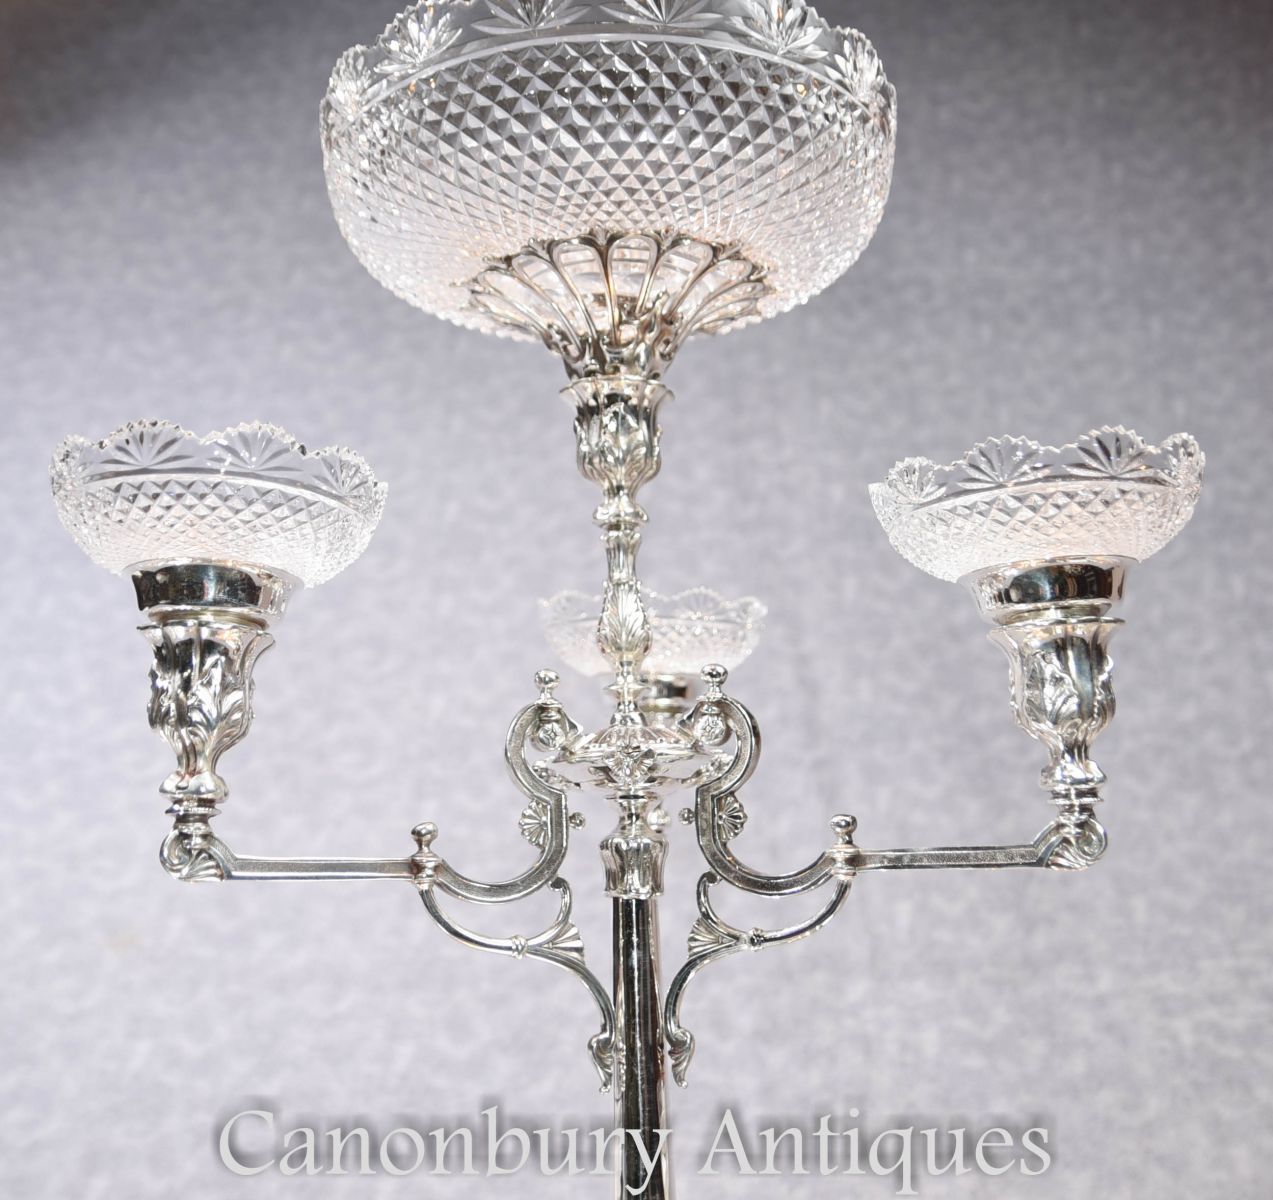 Just look at the detailed silver work on this high end centrepiece